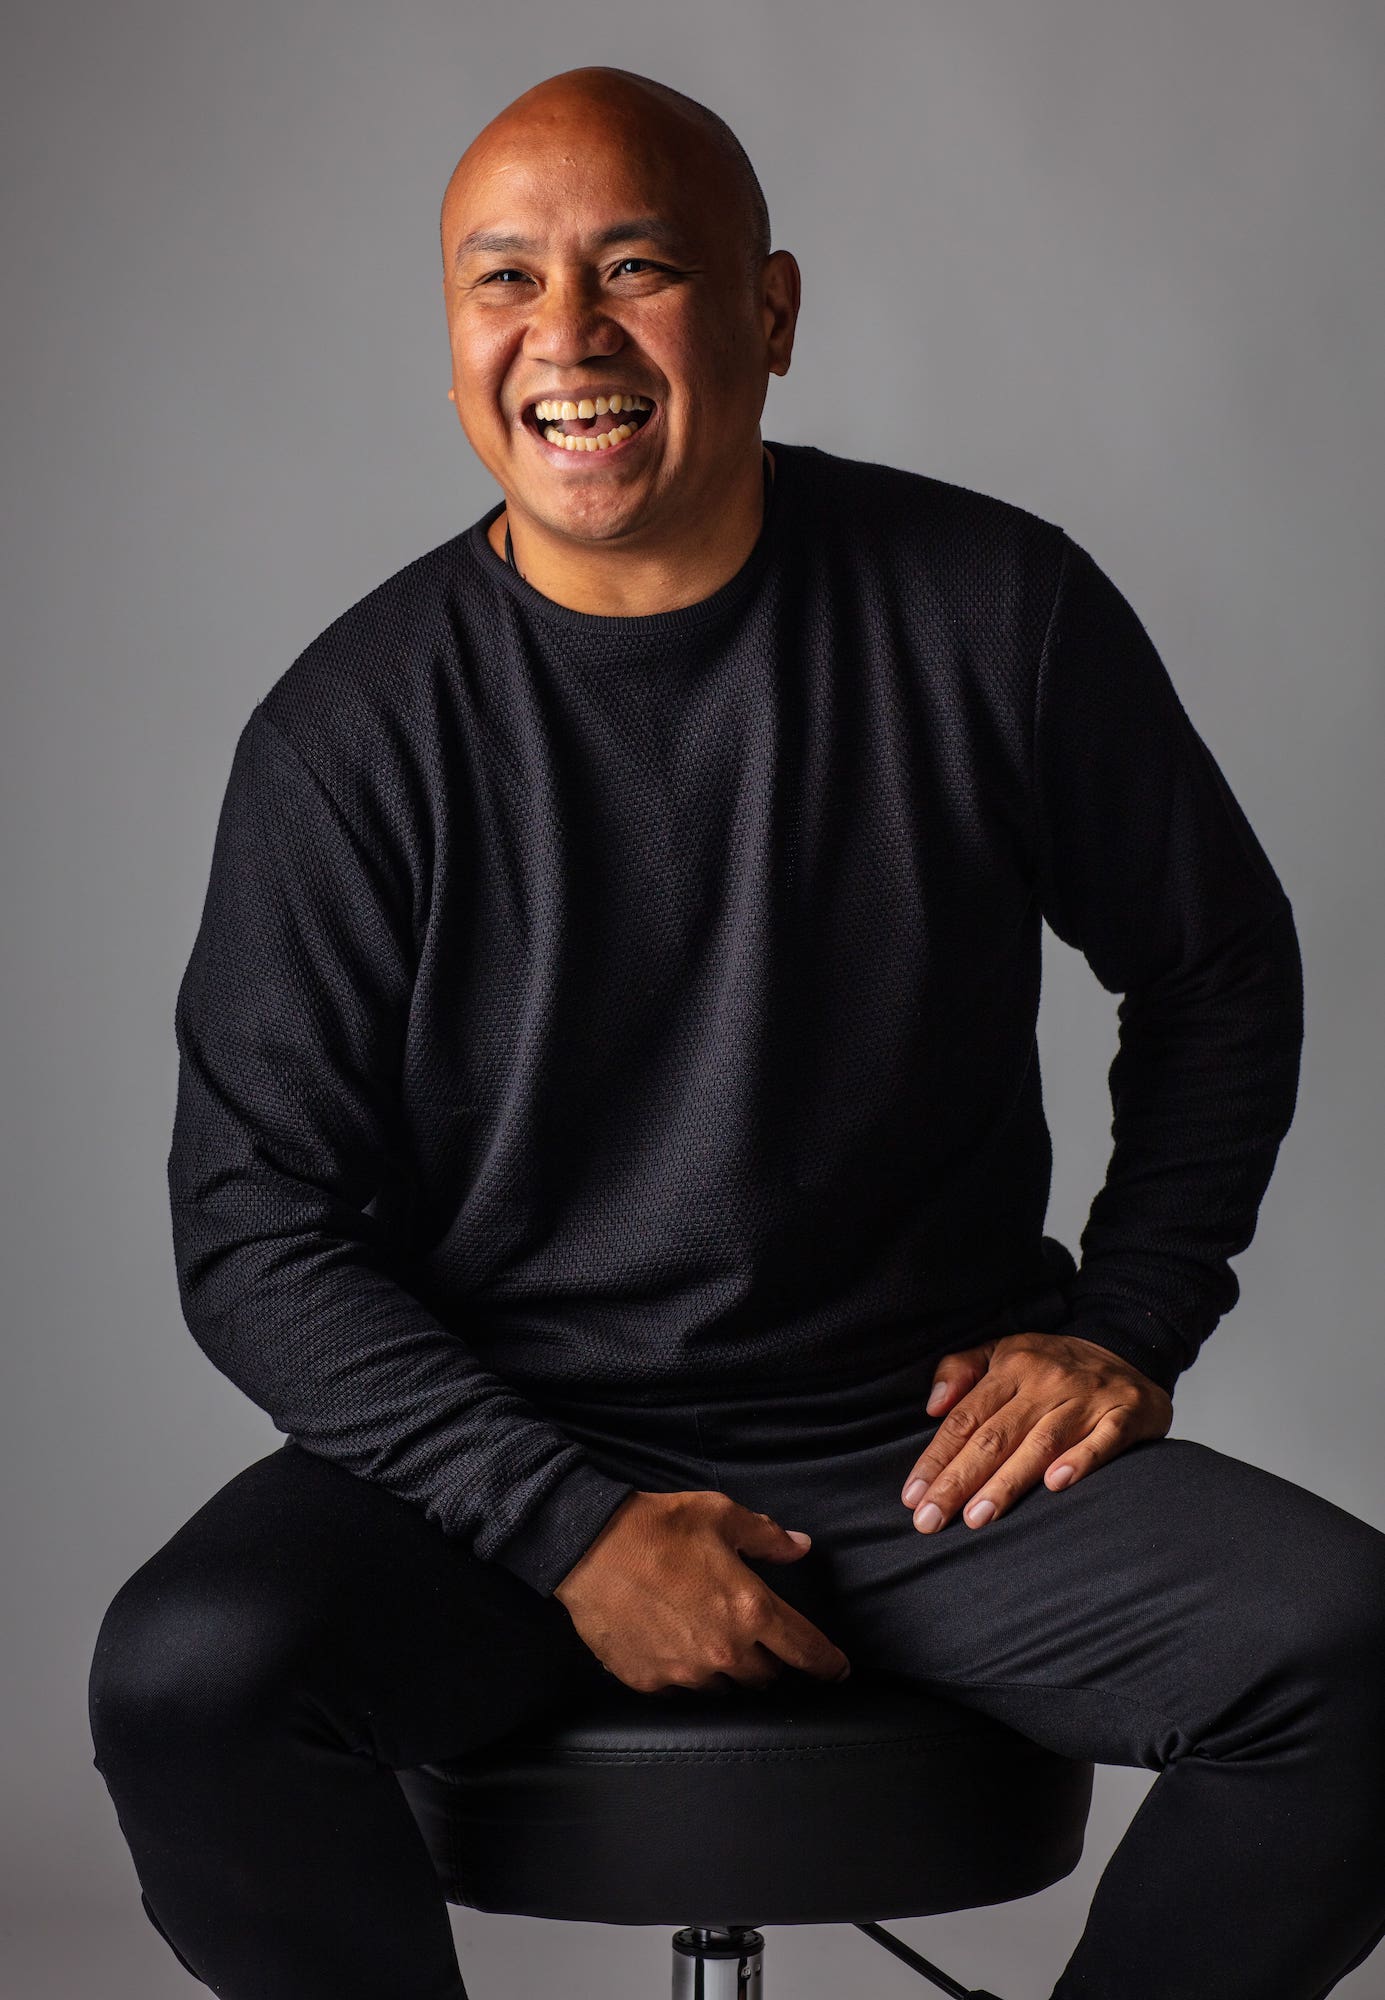 Photographic portrait of Patrick Rosal, a middle-aged Filipno American man. Rosal wears a black crewneck sweater and black pants. He is sitting on a stool, looking to his left, and is captured mid-laugh.